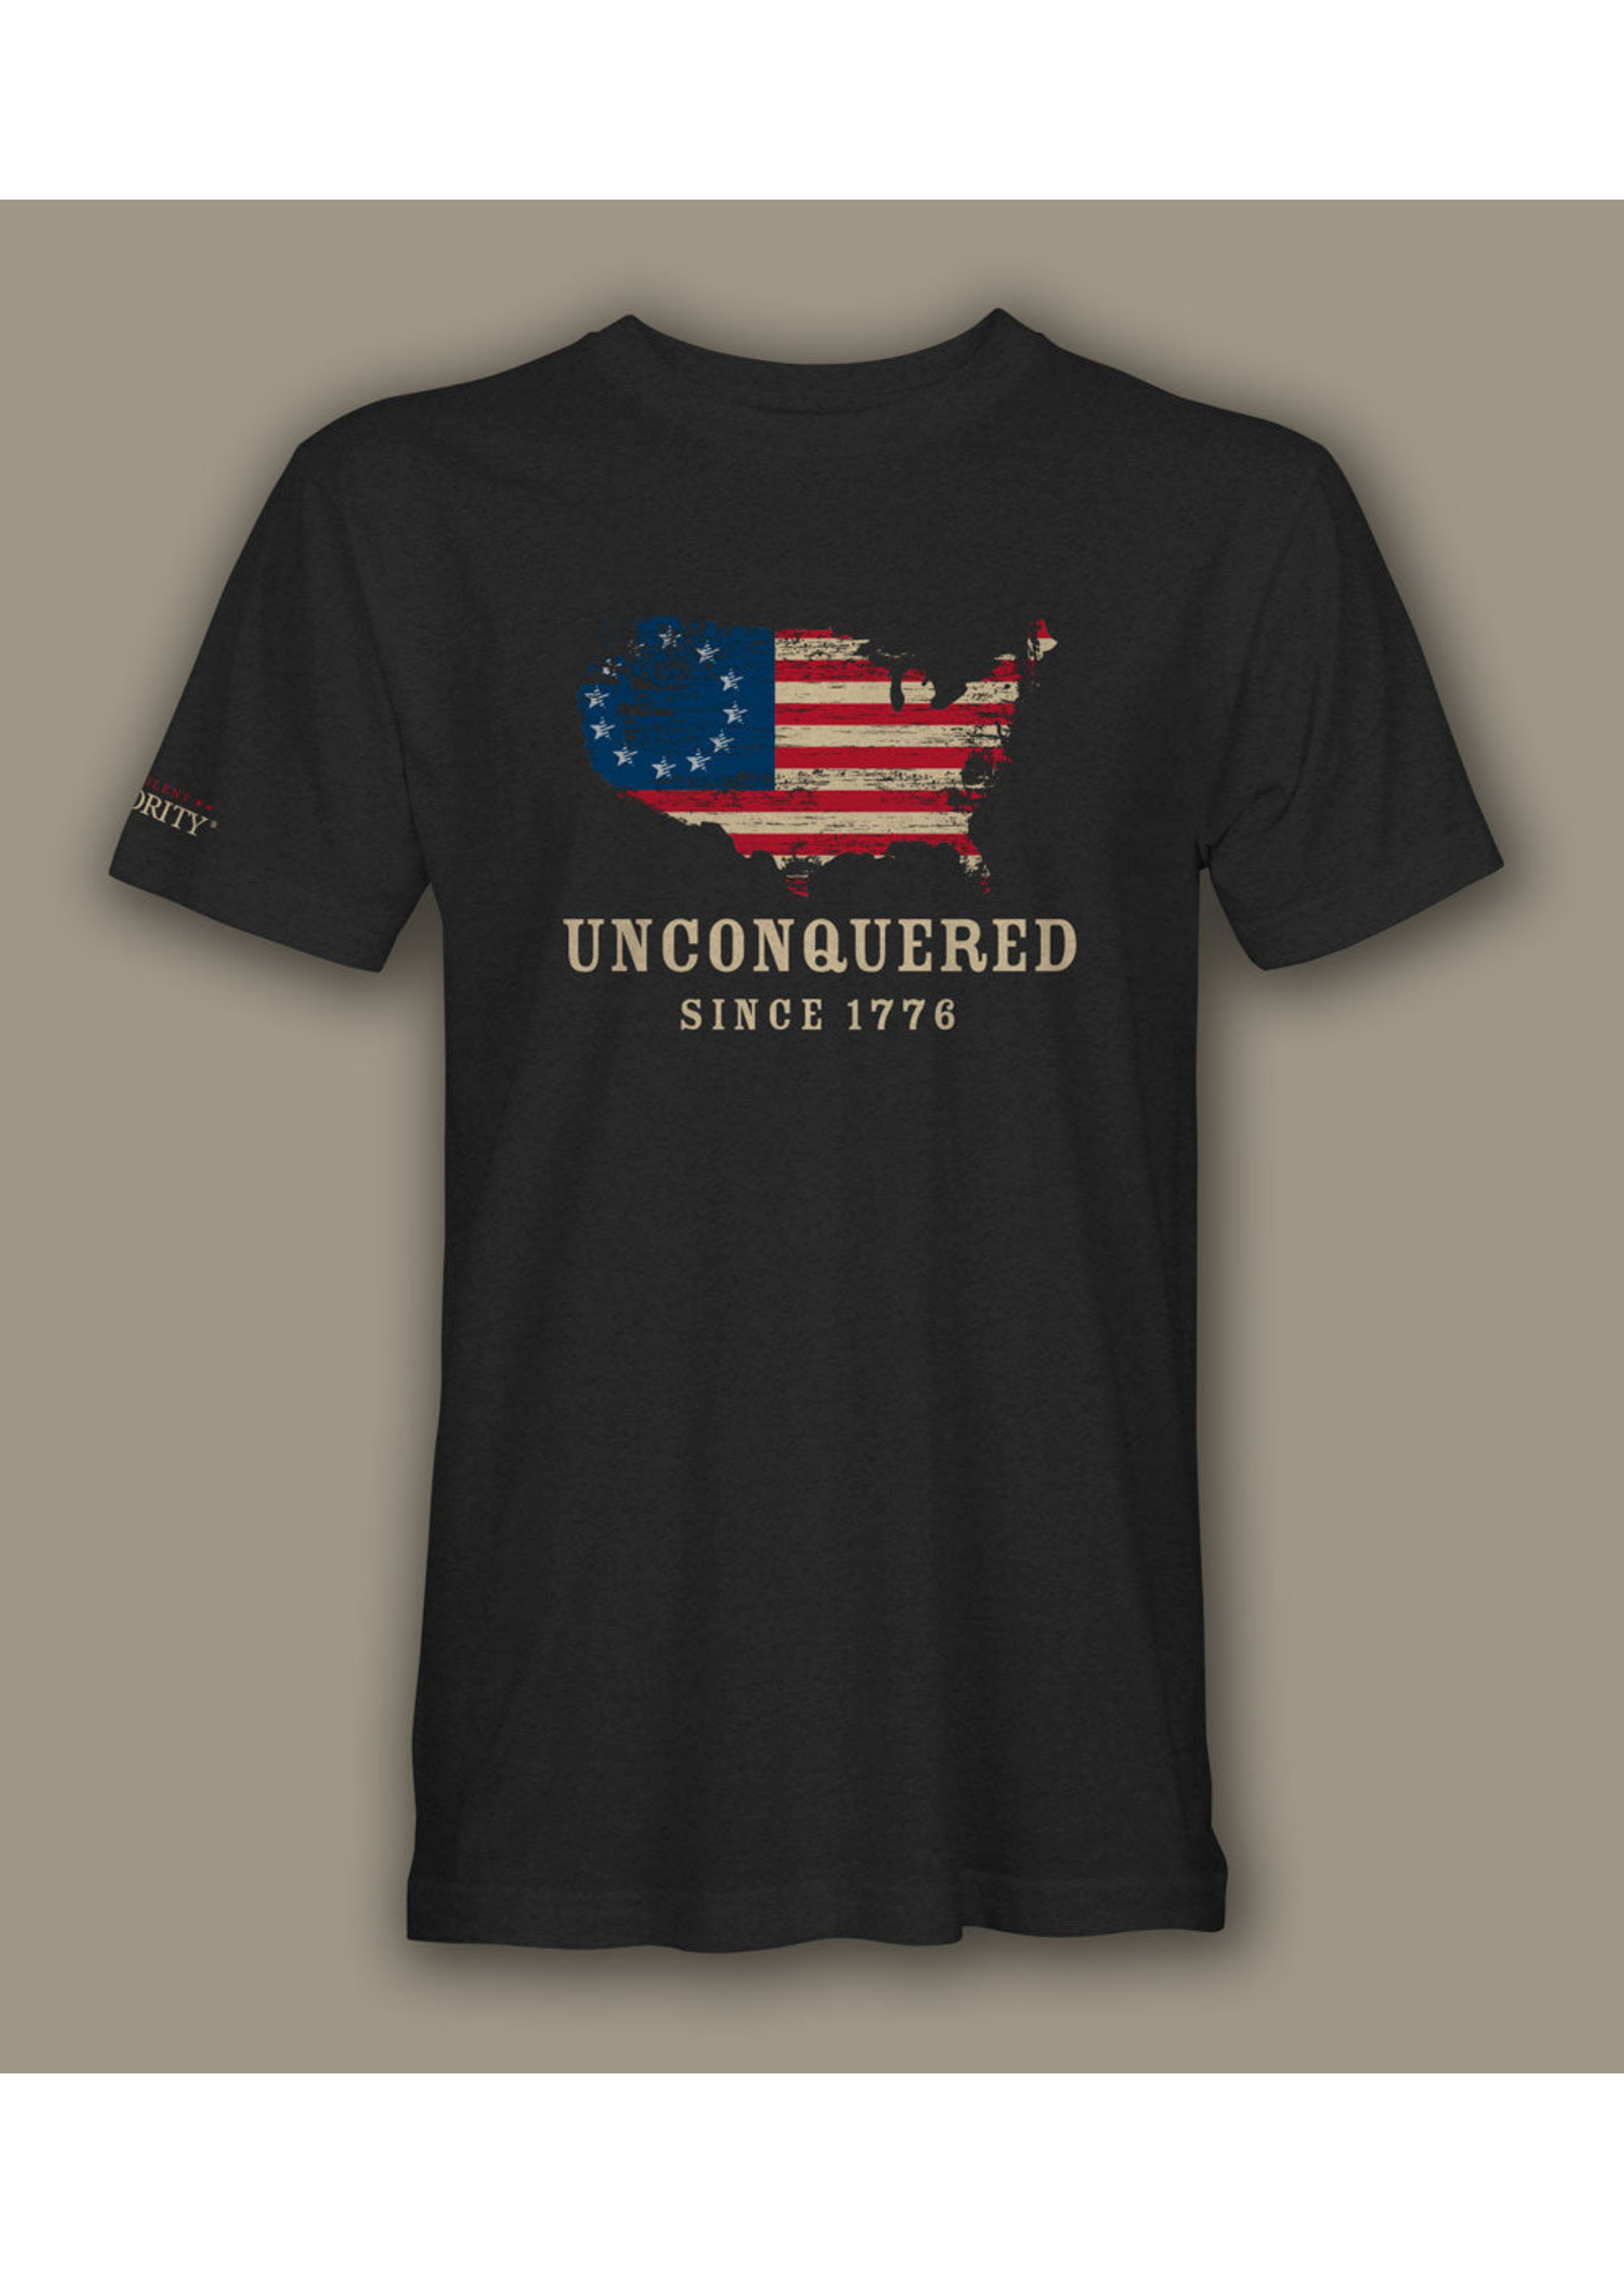 The Silent Majority UNCONQUERED Tee